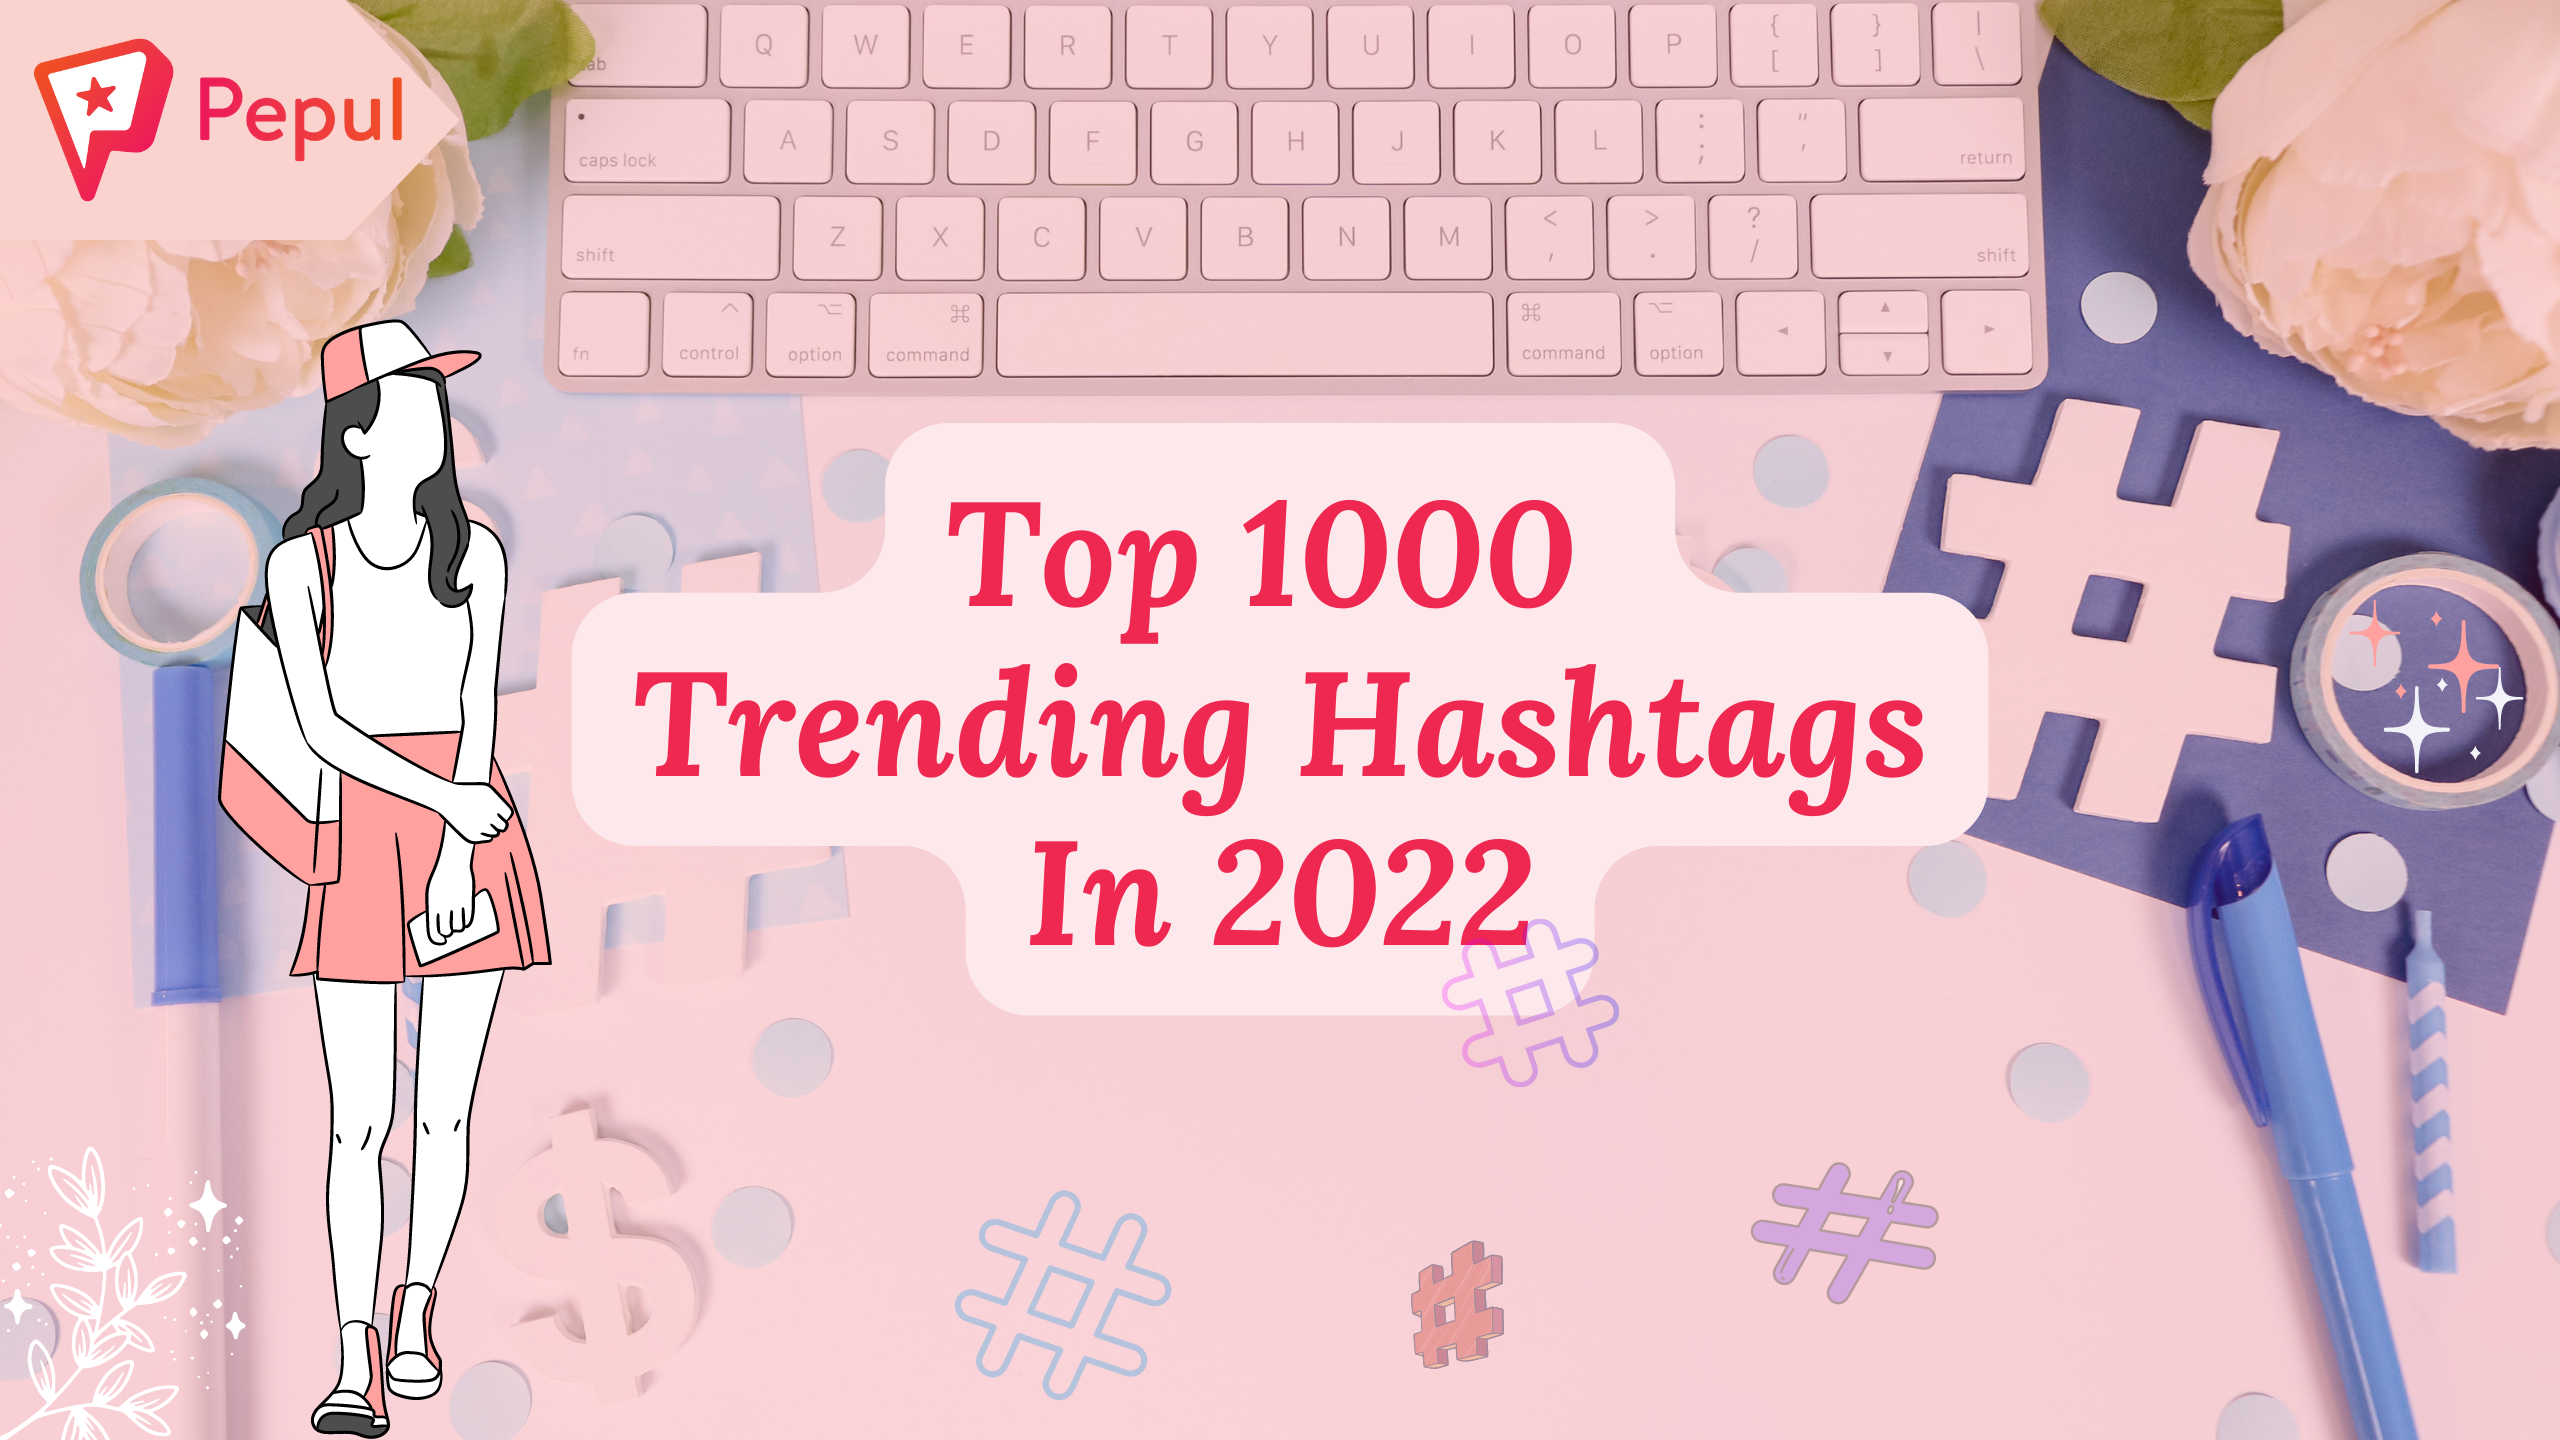 1000 Most Popular and Trending Hashtags in 2022